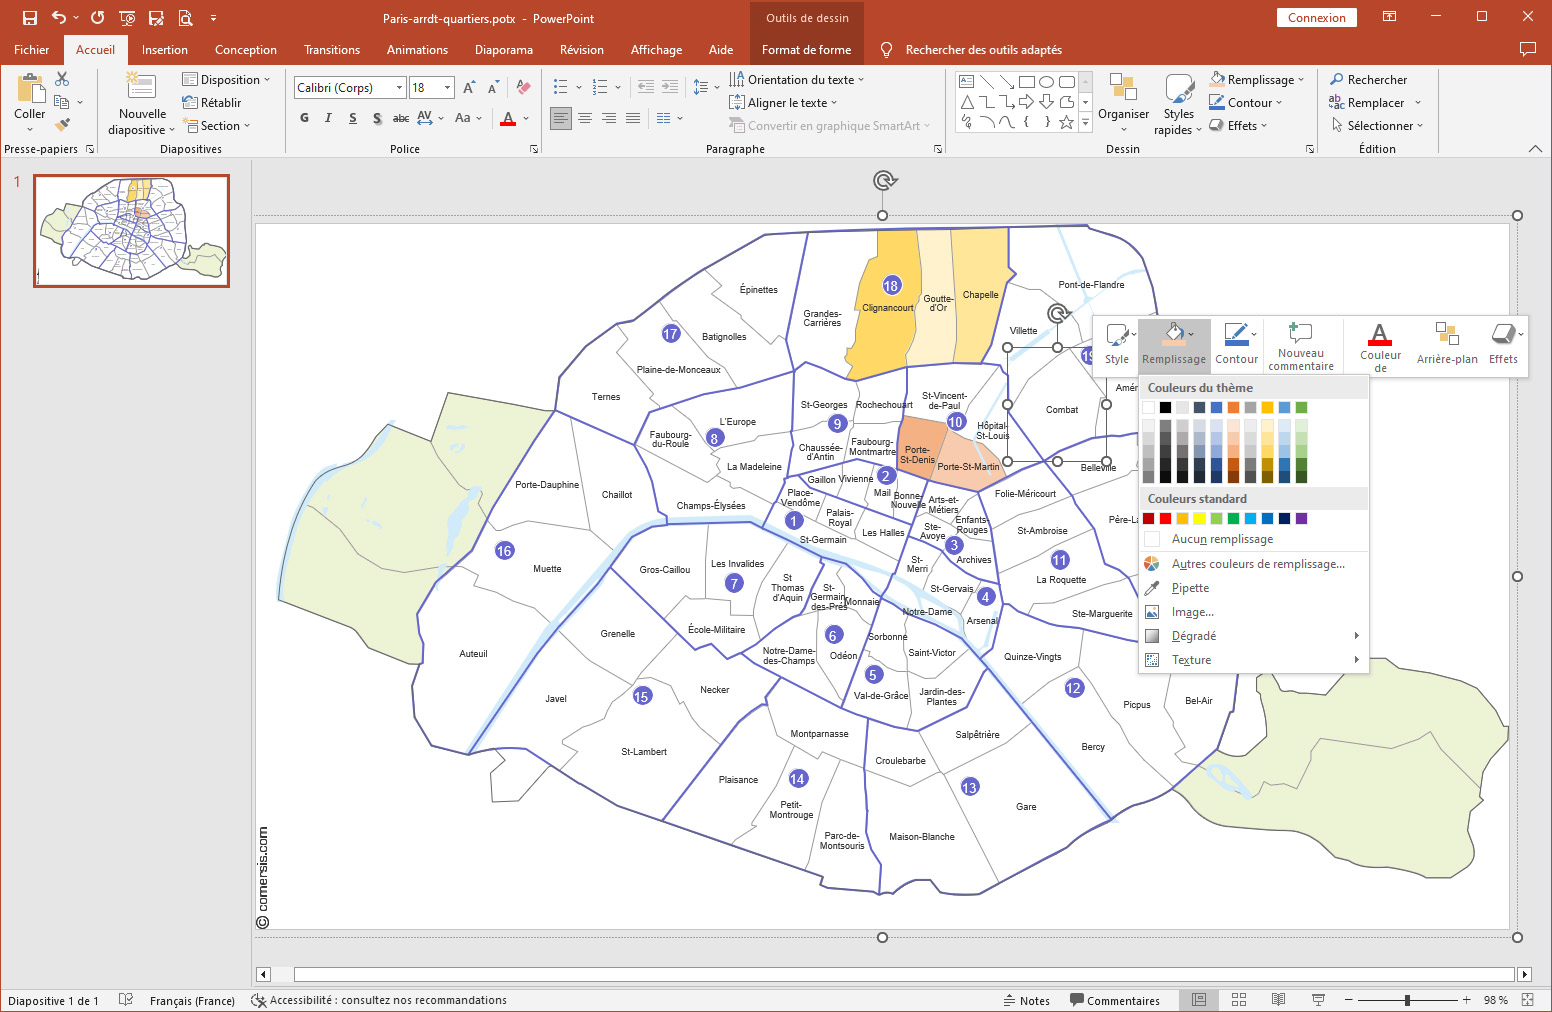 Excel and Word map of bouroughs of Paris. 2